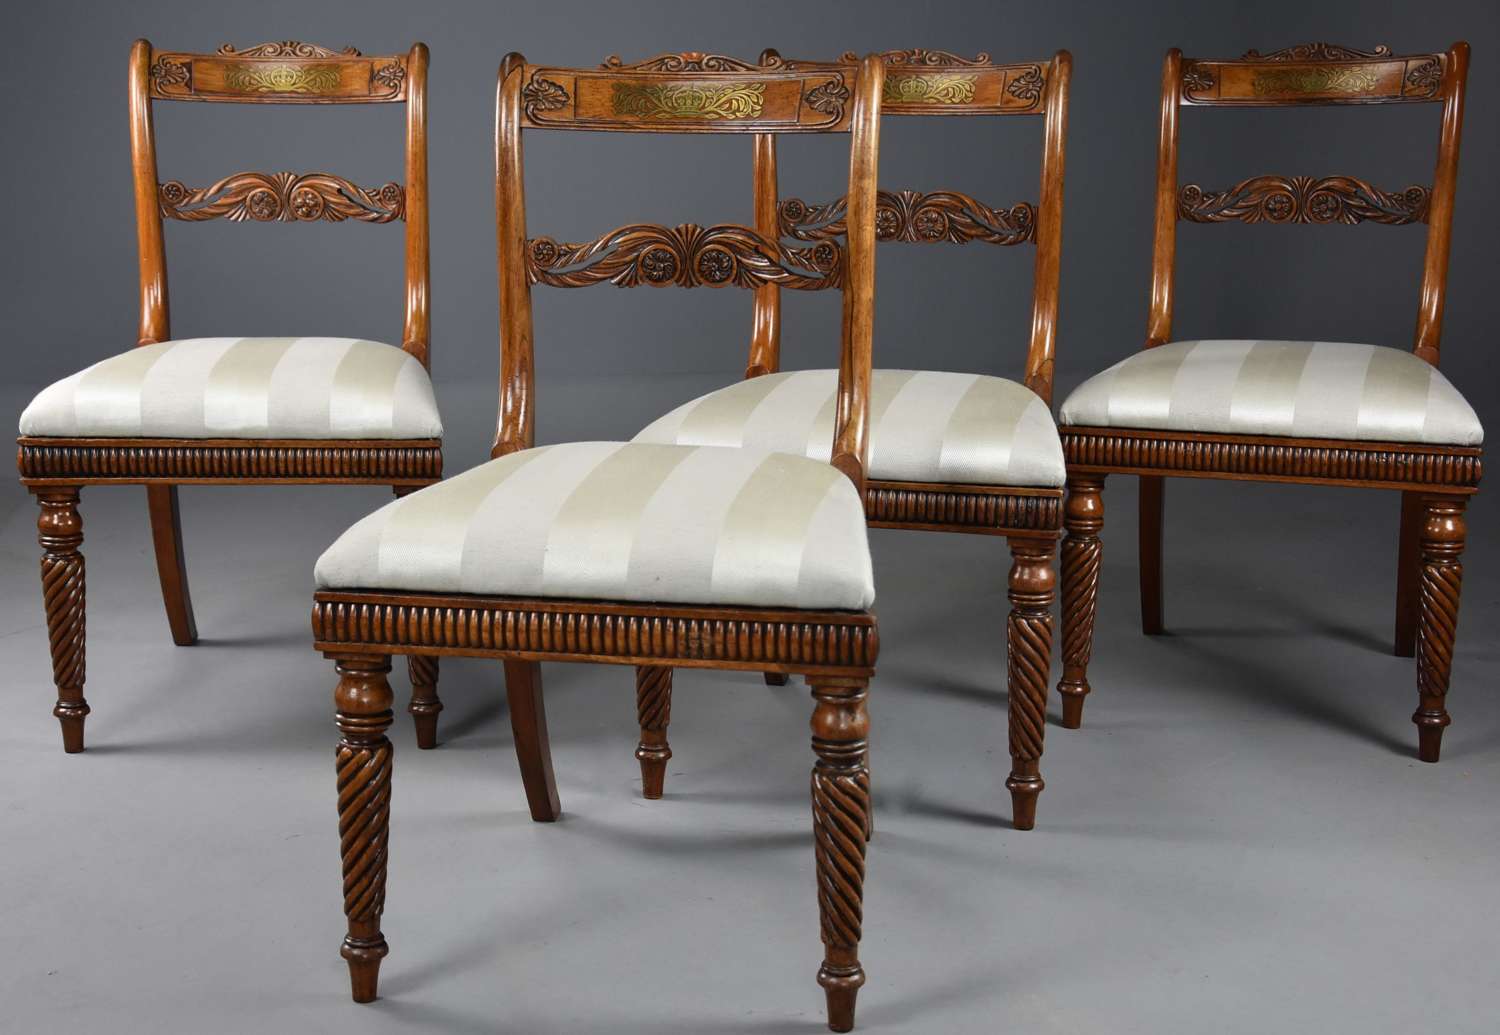 Fine quality set of four early 19thc Regency rosewood chairs